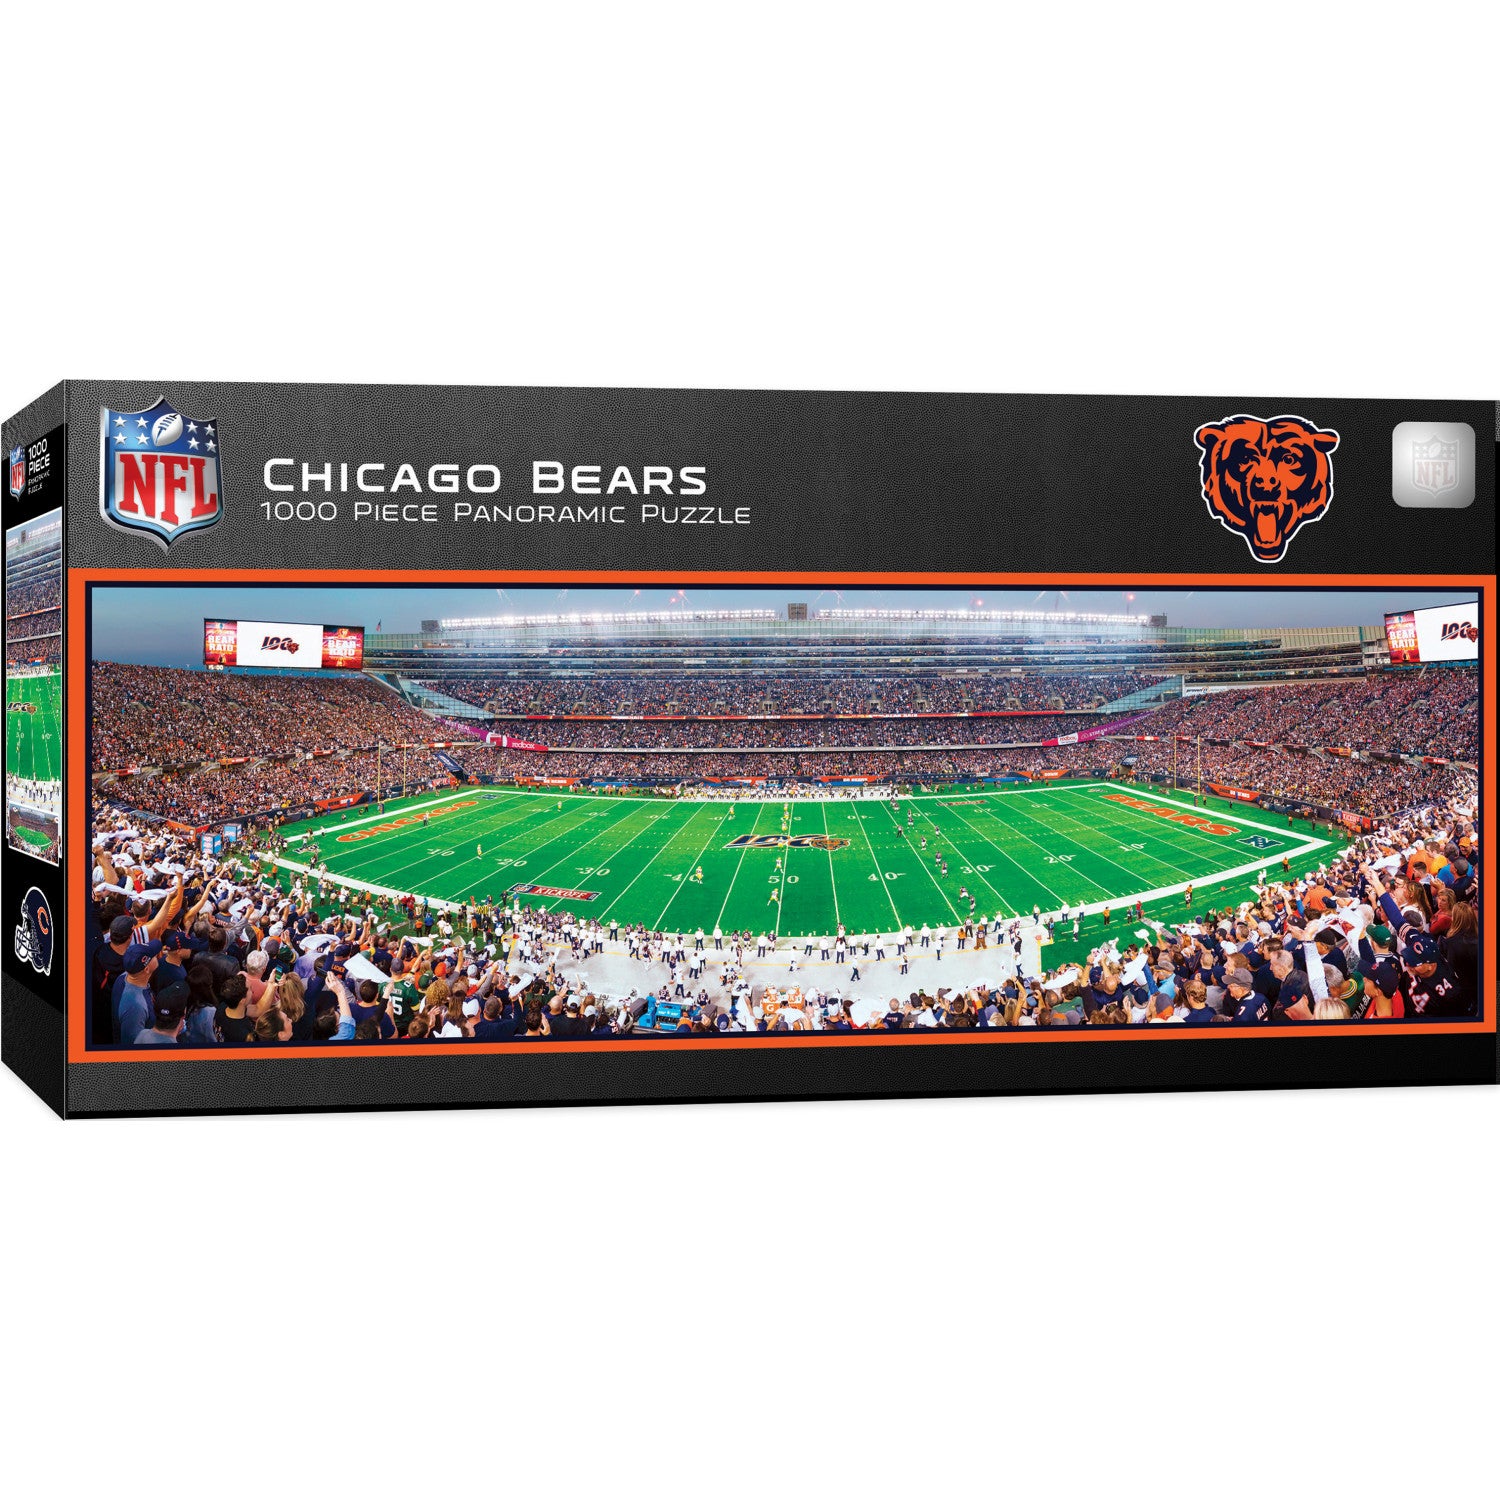 Chicago Bears - 1000 Piece Panoramic Jigsaw Puzzle - Center View